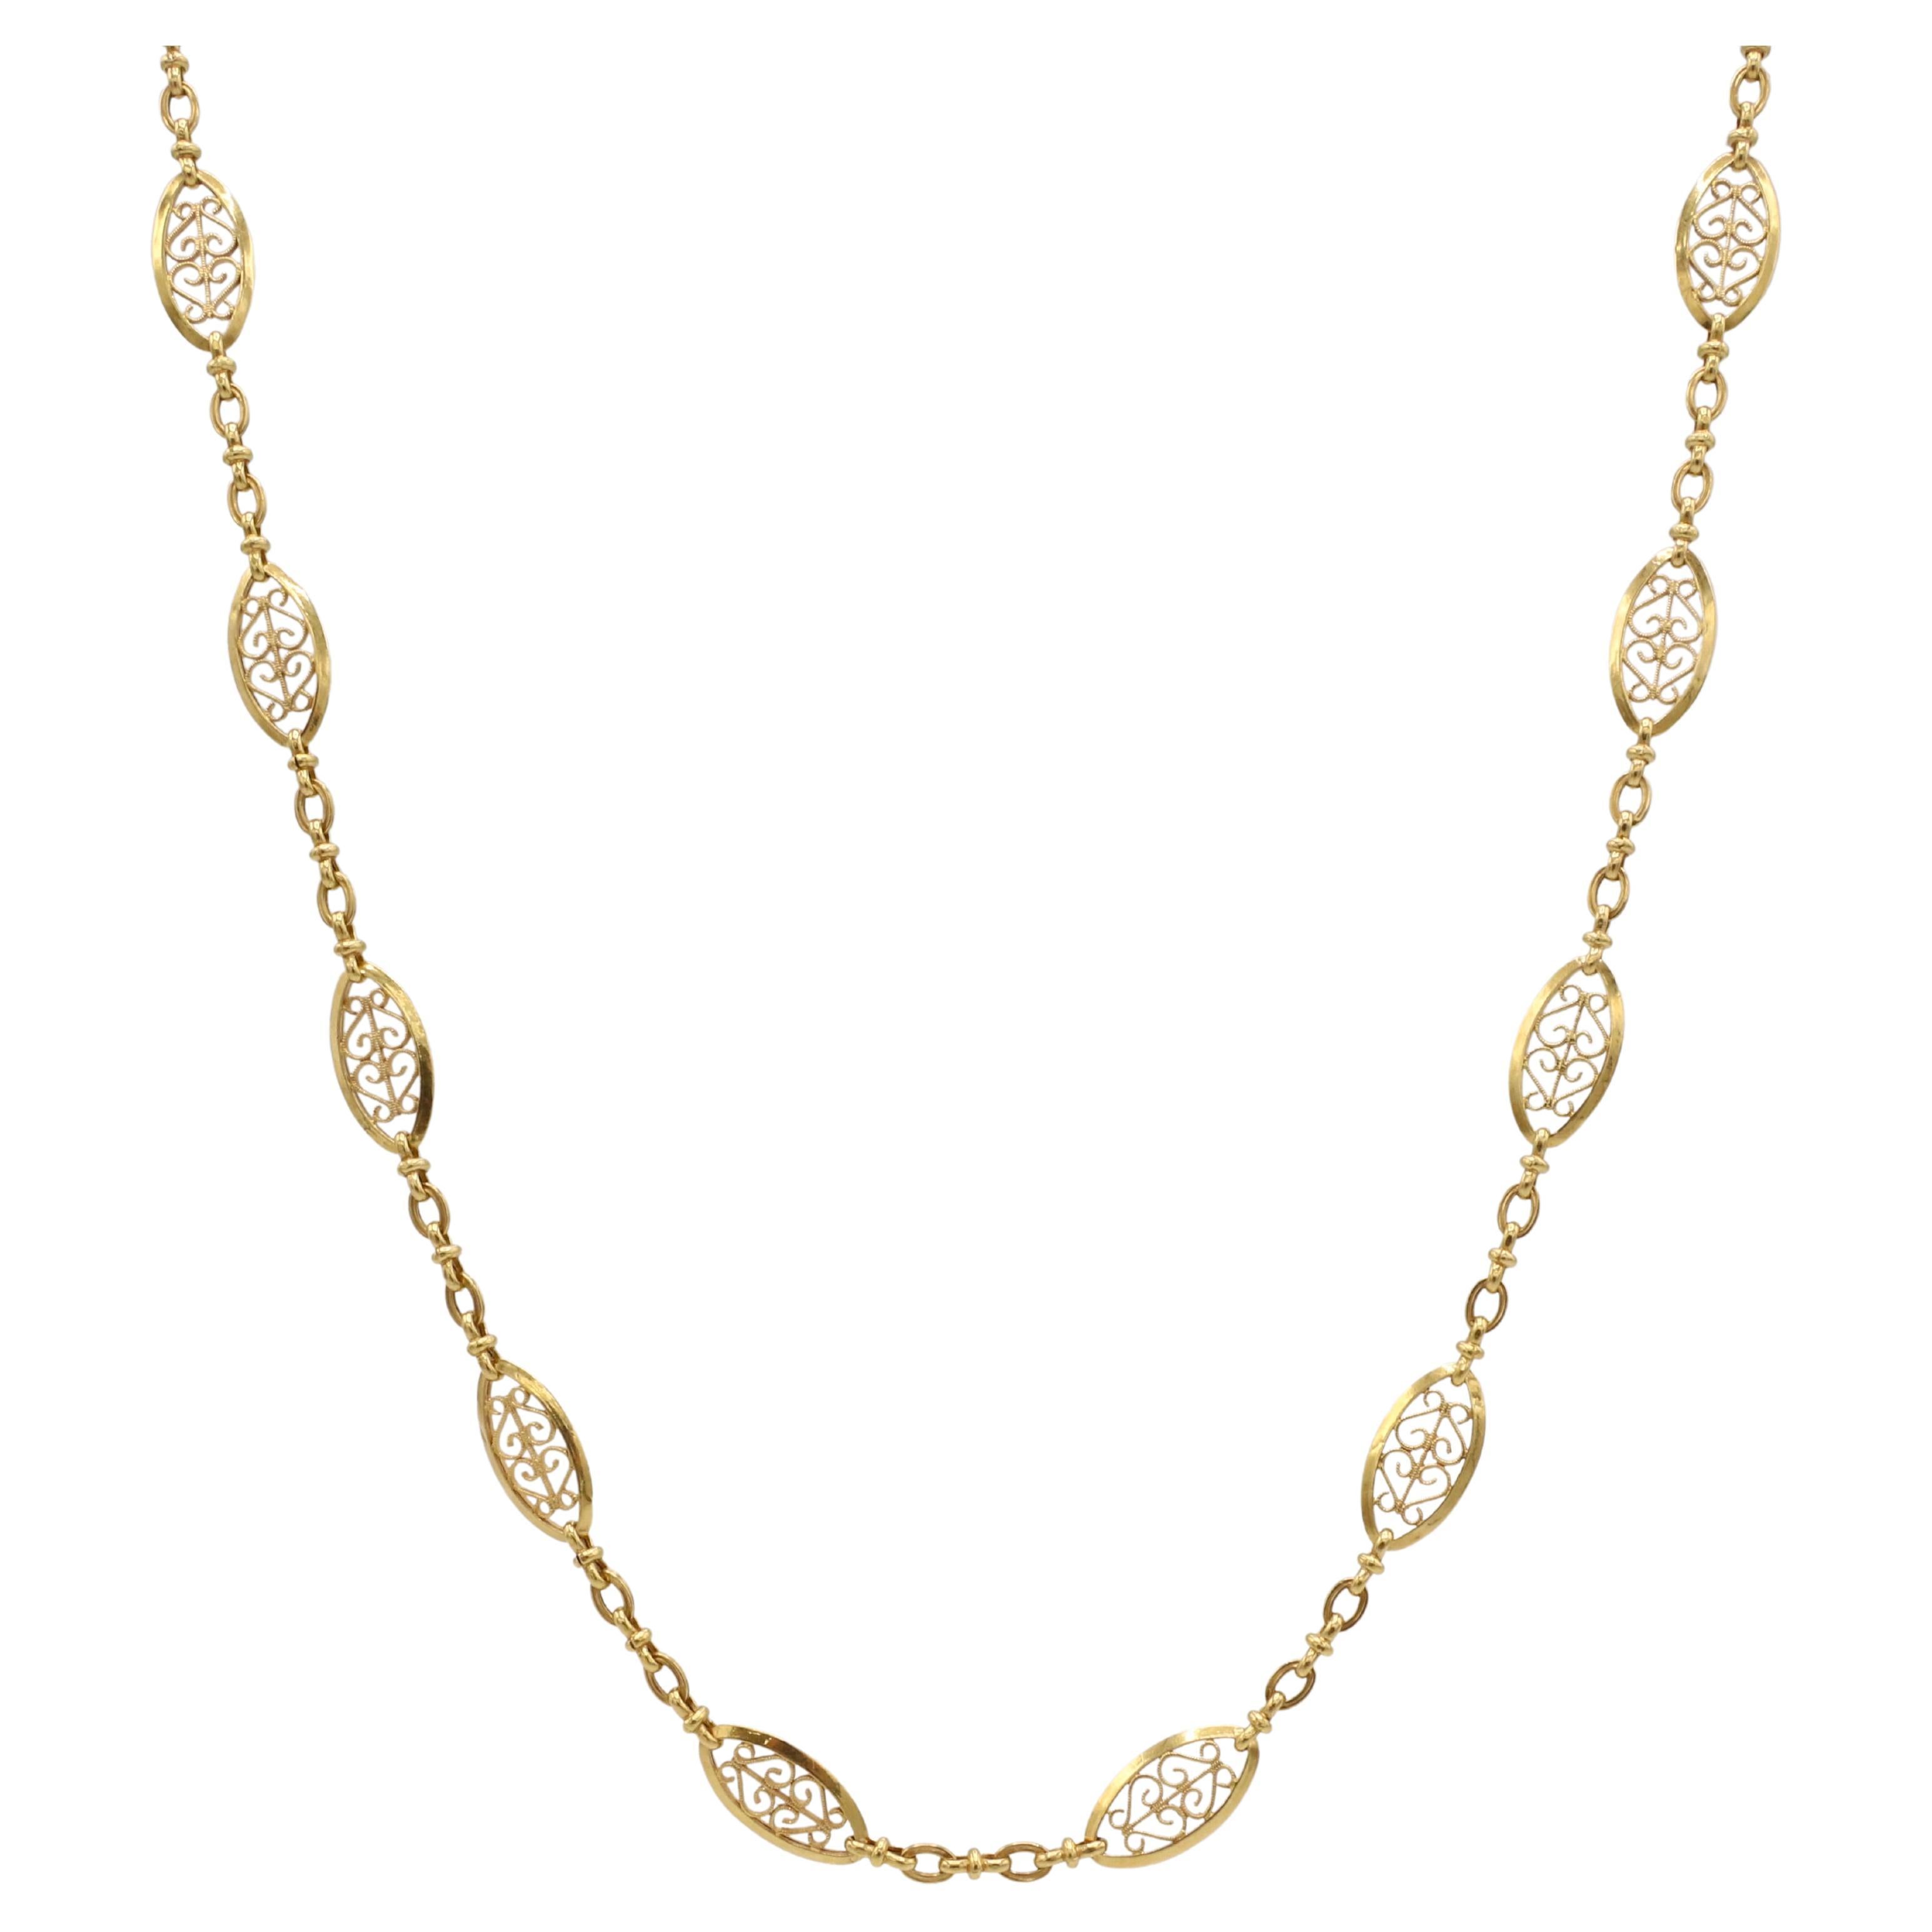 Art Deco French 18 Karat Yellow Gold Filigree Chain Link Necklace 